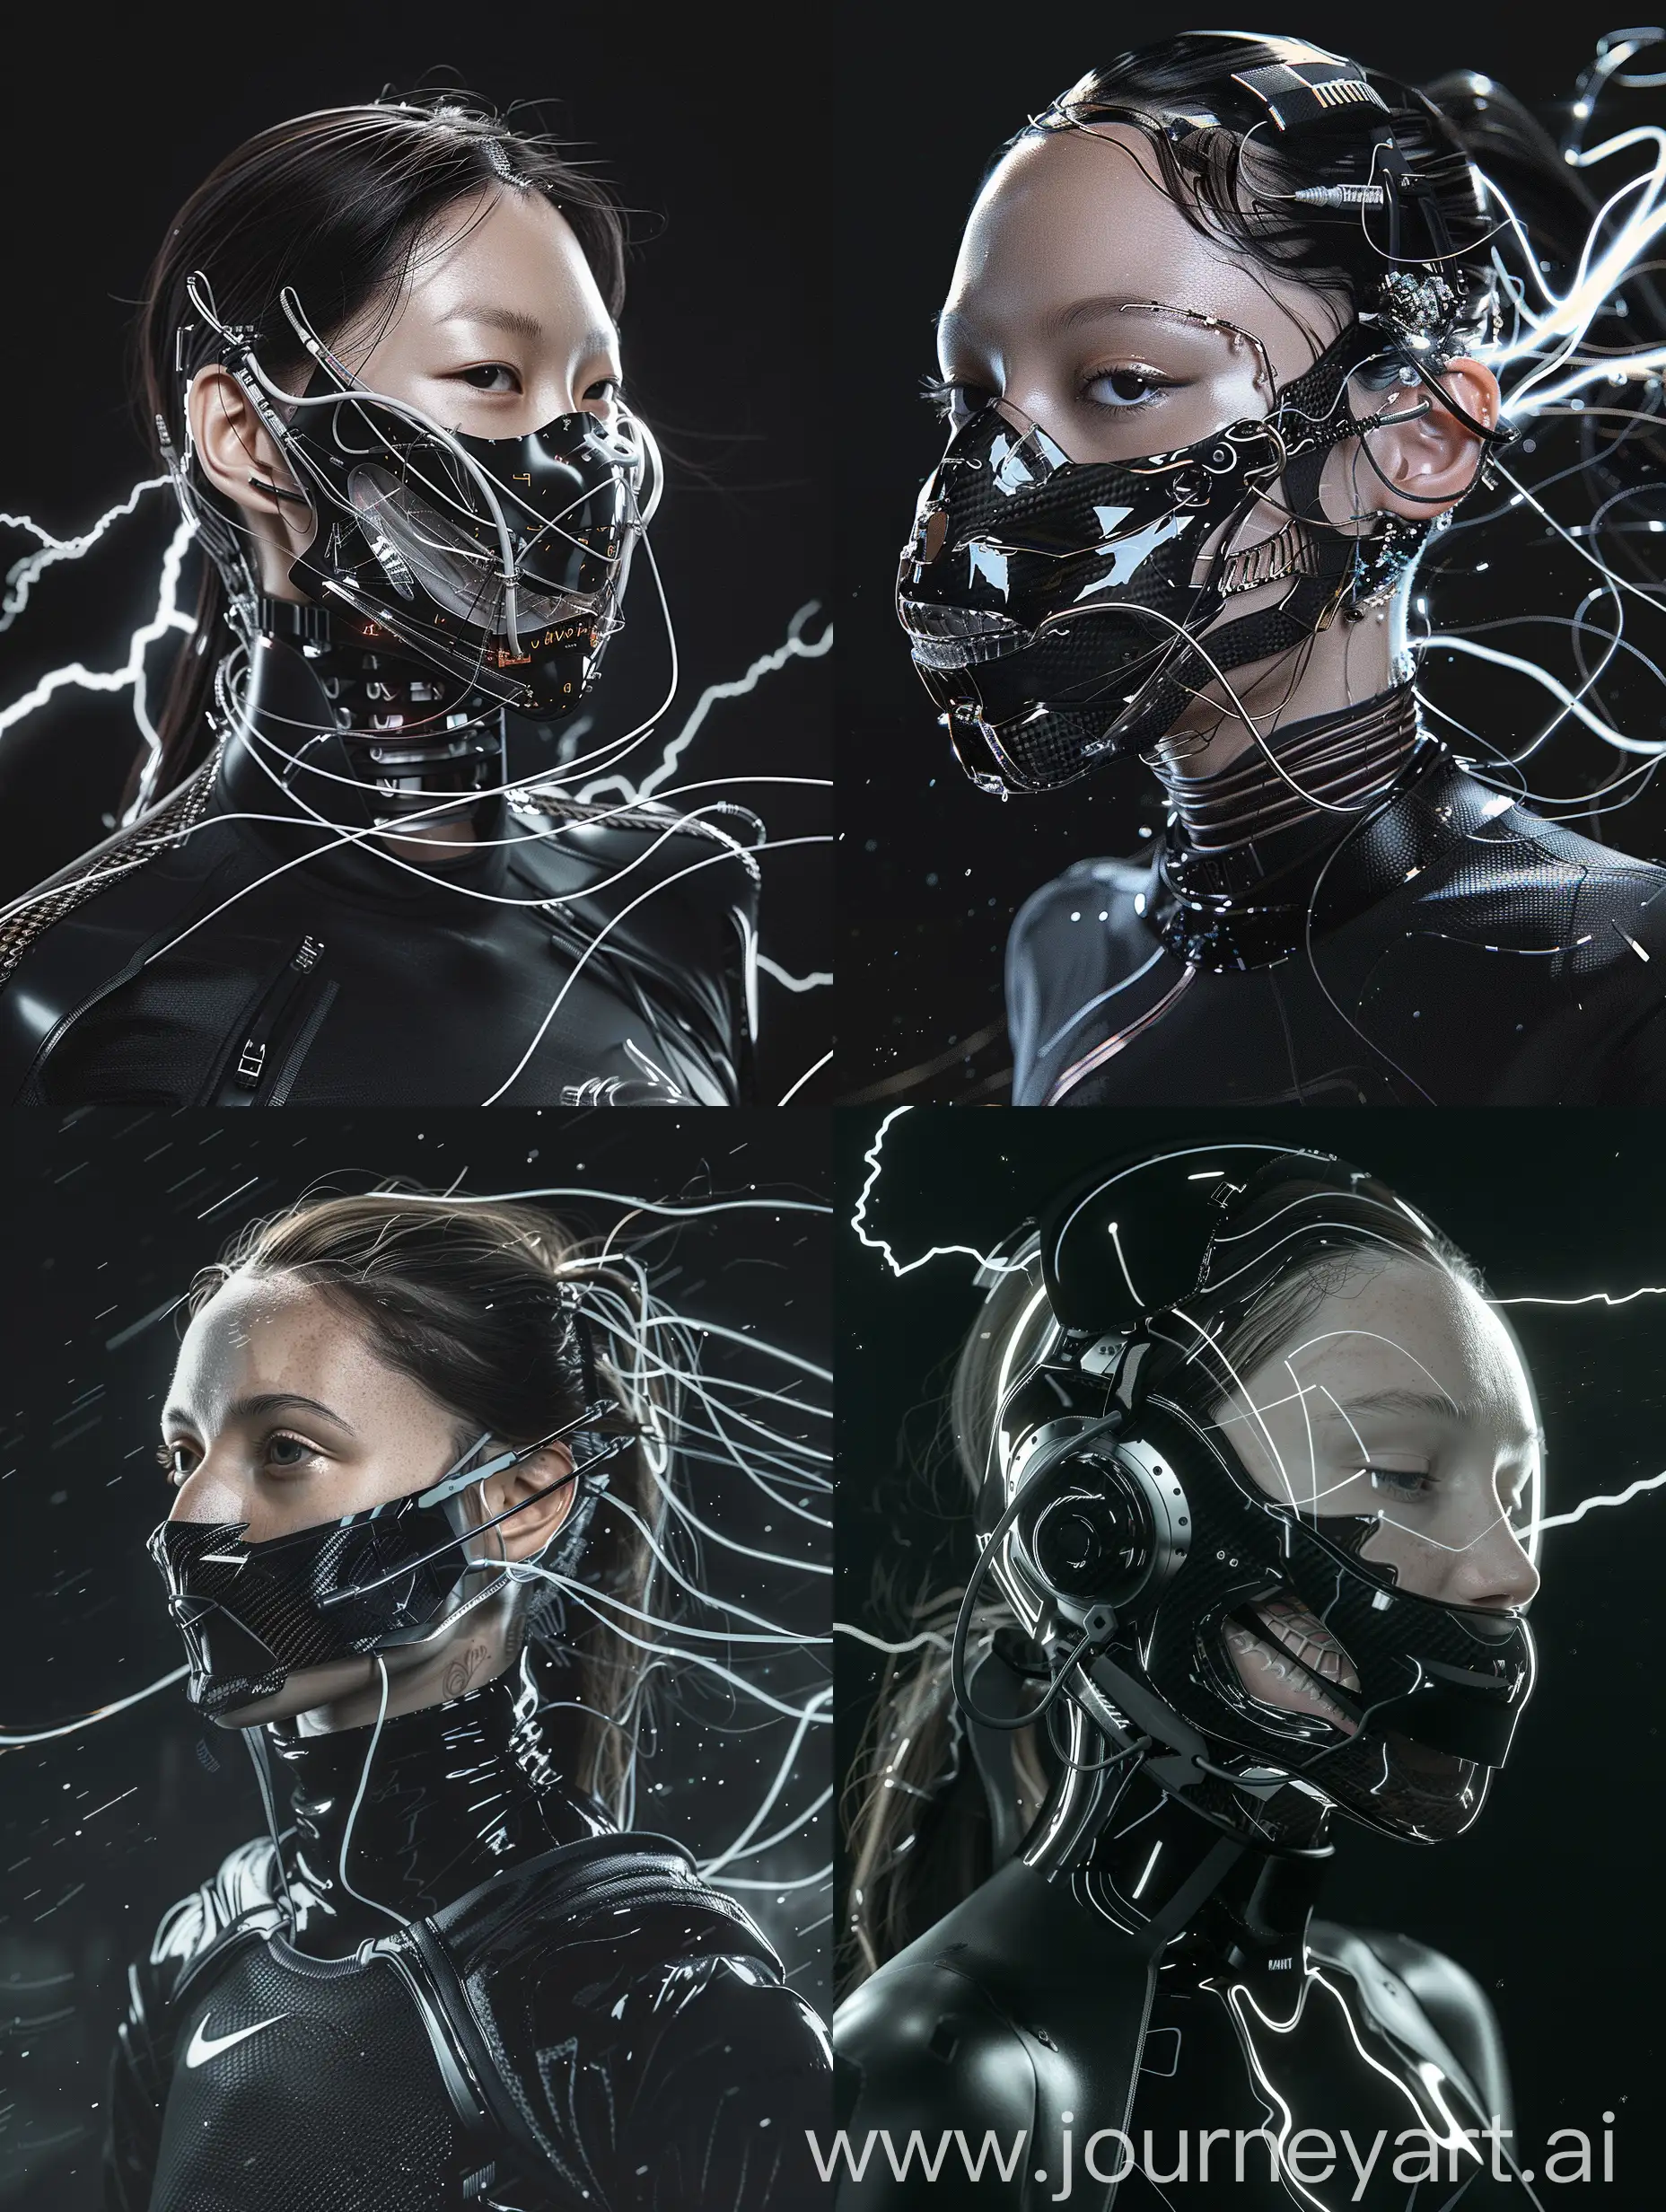 Against a sleek black backdrop, behold a mesmerizing beautiful character adorned with a cybernetic mouth-covering mask. It seamlessly blends cutting-edge technology with intricate details, boasting carbon fiber textures, sleek aluminum accents,glass details and wires. Symbolizing the delicate balance between humanity and machine, her appearance embodies the essence of a futuristic cyberpunk aesthetic, enhanced with Nike-inspired add-ons. With dynamic movements reminiscent of action film sequences, cinematic haze, and energy that crackles like lightning, her presence captivates with its irresistible allure